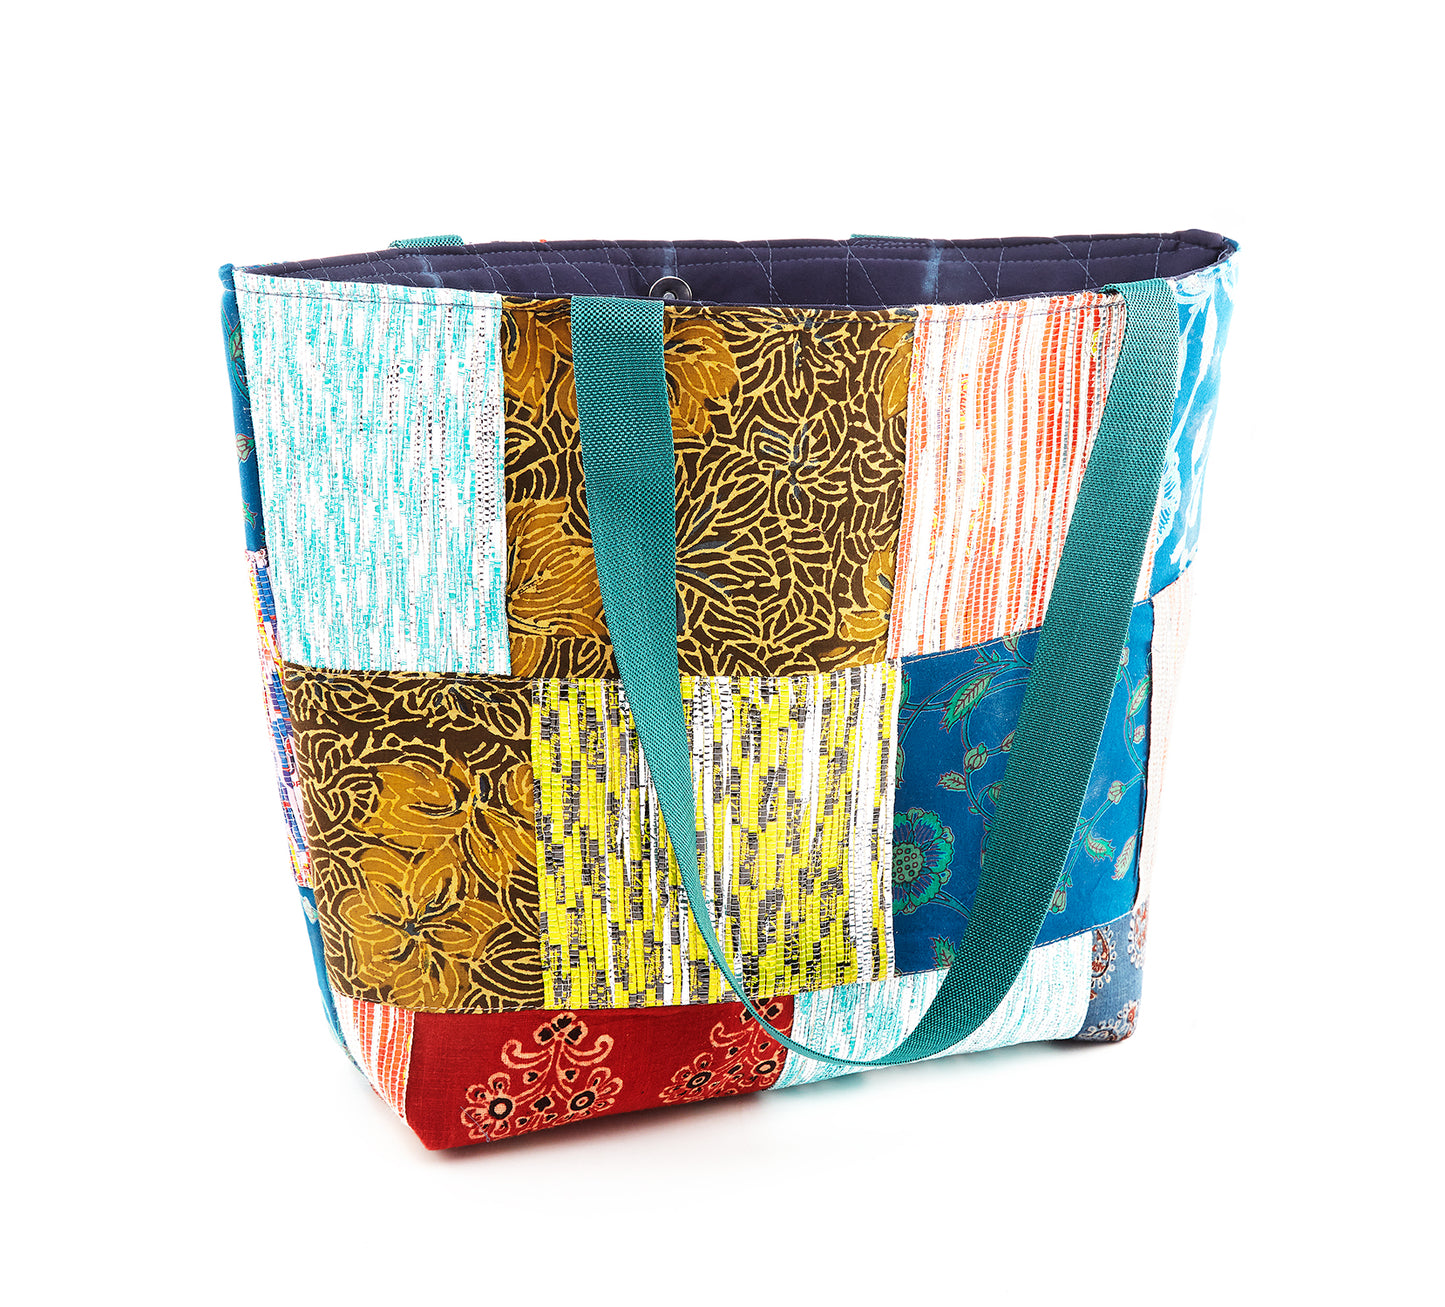 Multi - Colored - Recycled Plastic Bag with Fabric